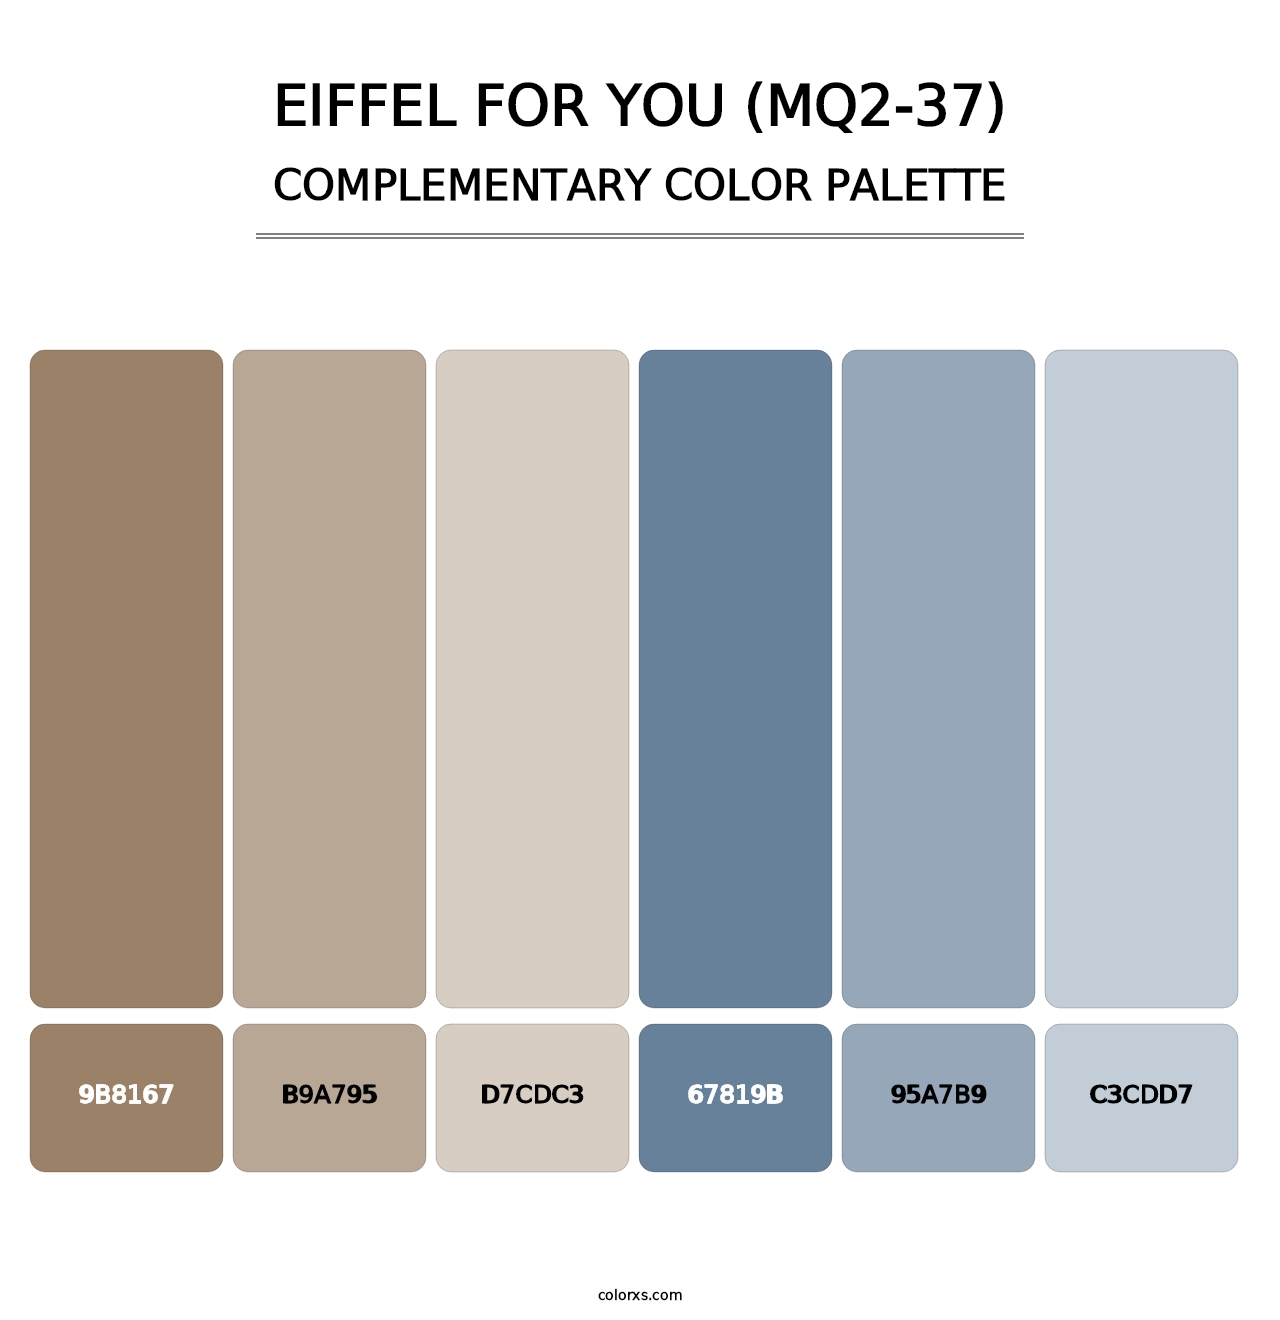 Eiffel For You (MQ2-37) - Complementary Color Palette